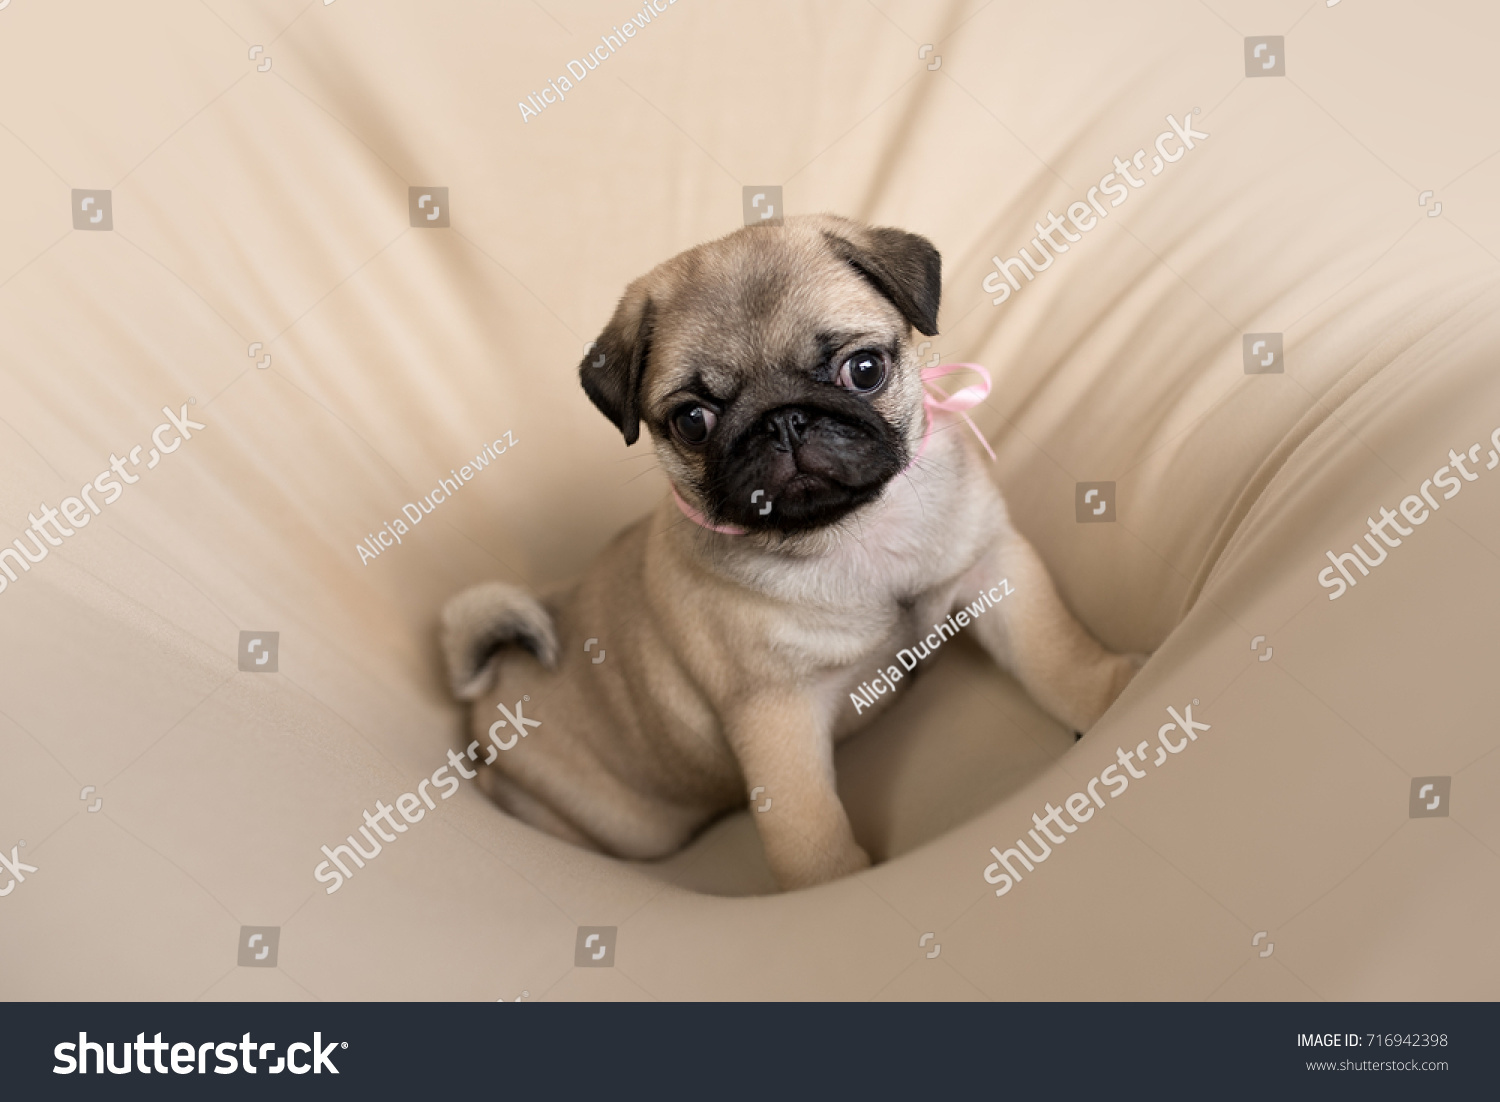 stock photo cute weeks old pug puppy dog is sitting soft beige creme background is surrounding subject 716942398